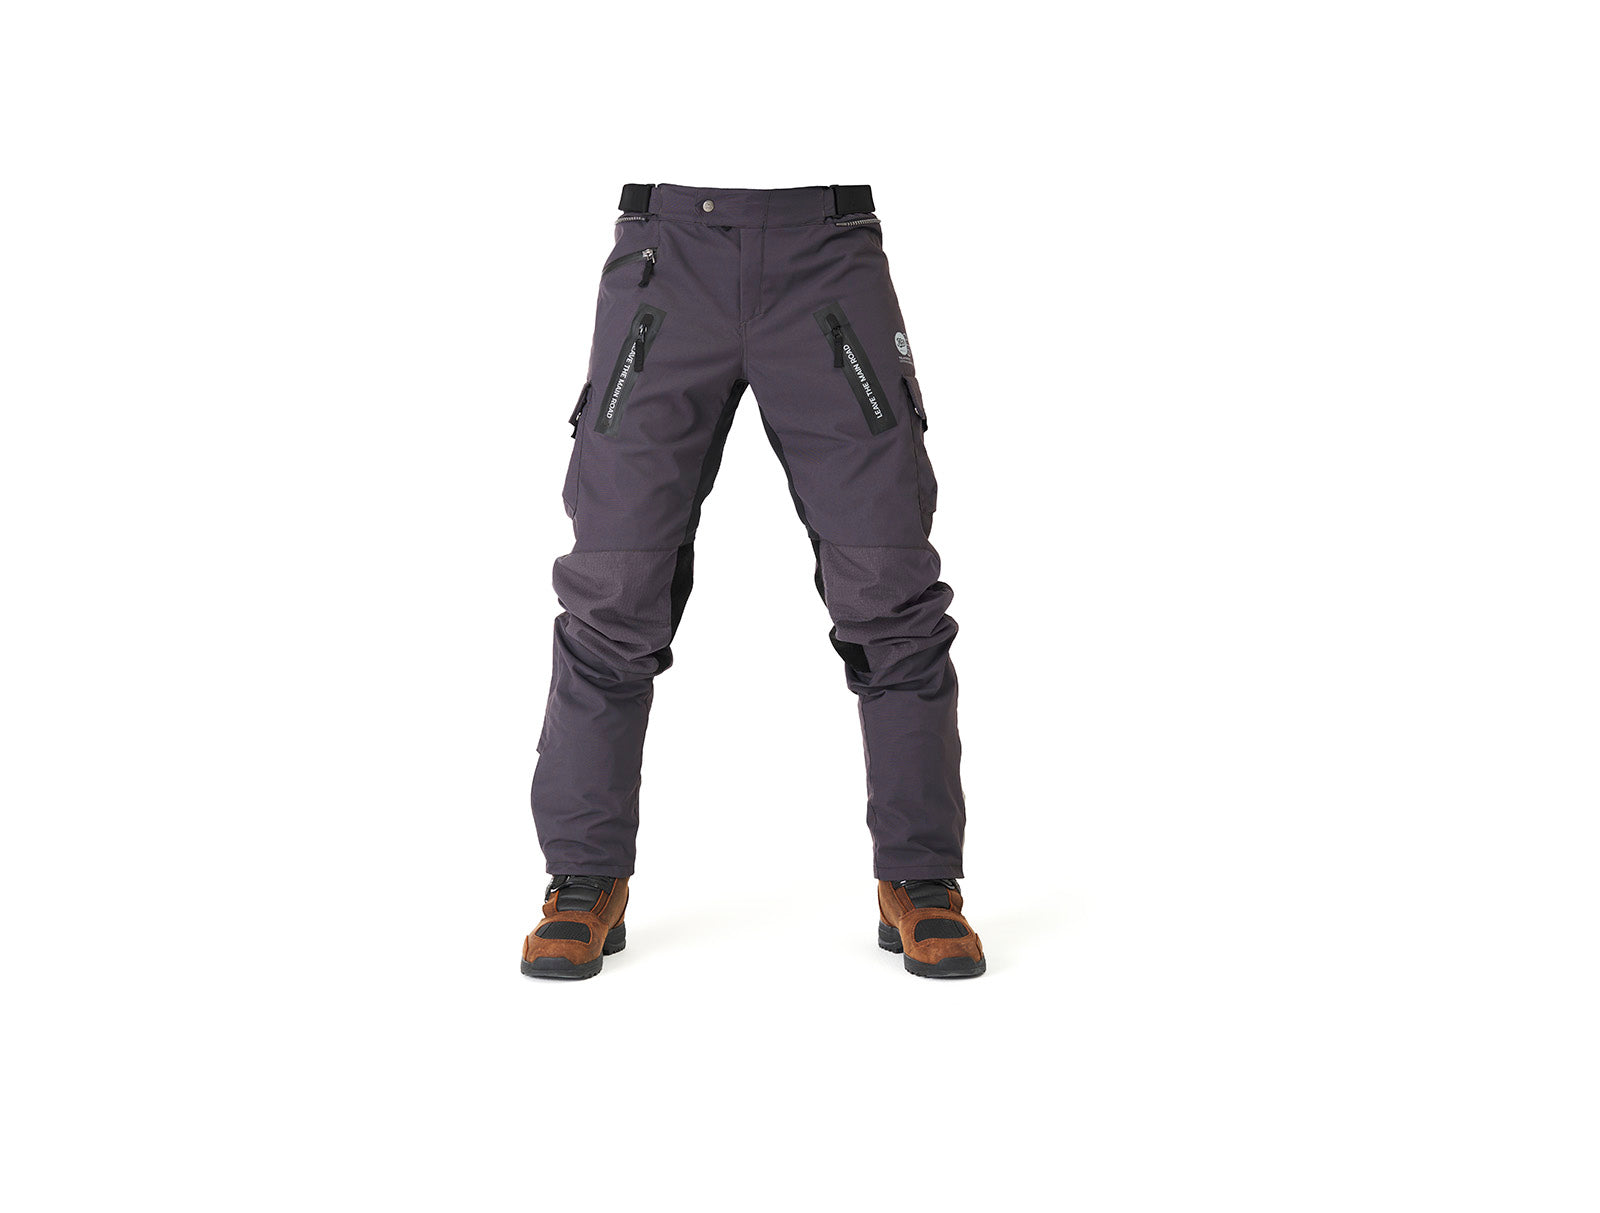 Astrail Pant, Expedition Division